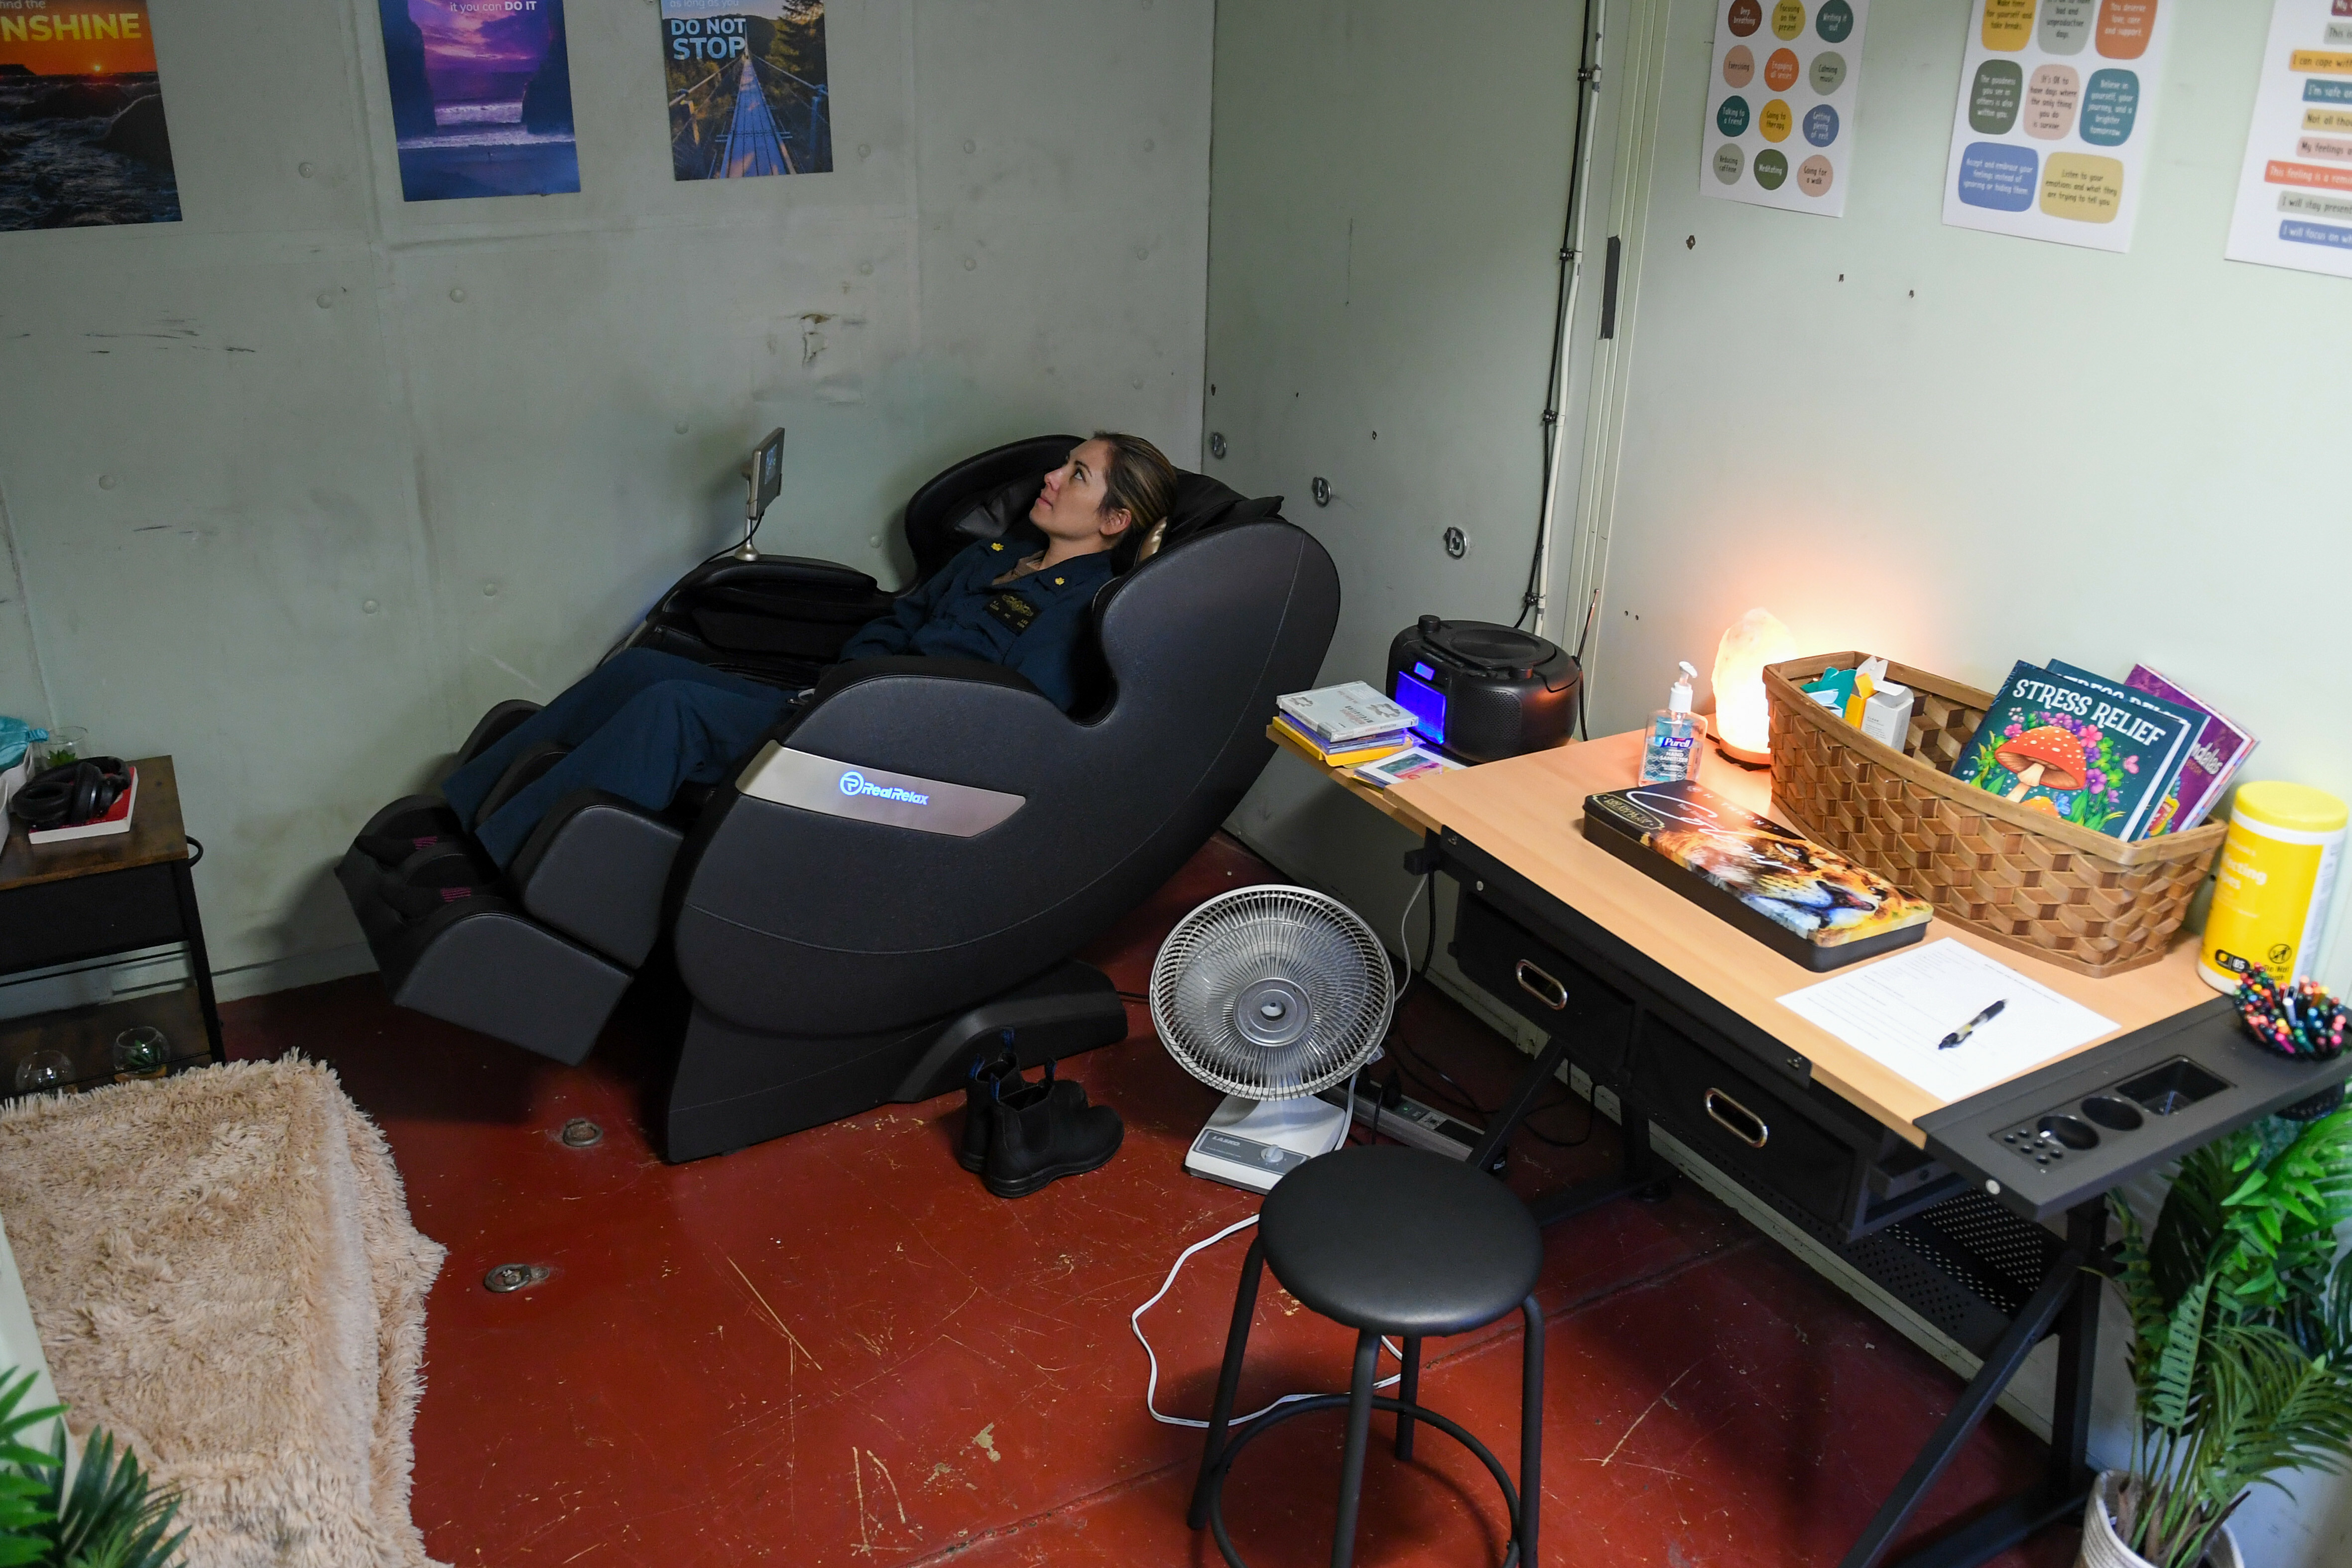 U.S. Lt. Cmdr. Katie Lee, an ER doctor, relaxes in a massage chair in the resiliency room aboard the hospital ship USNS Mercy 